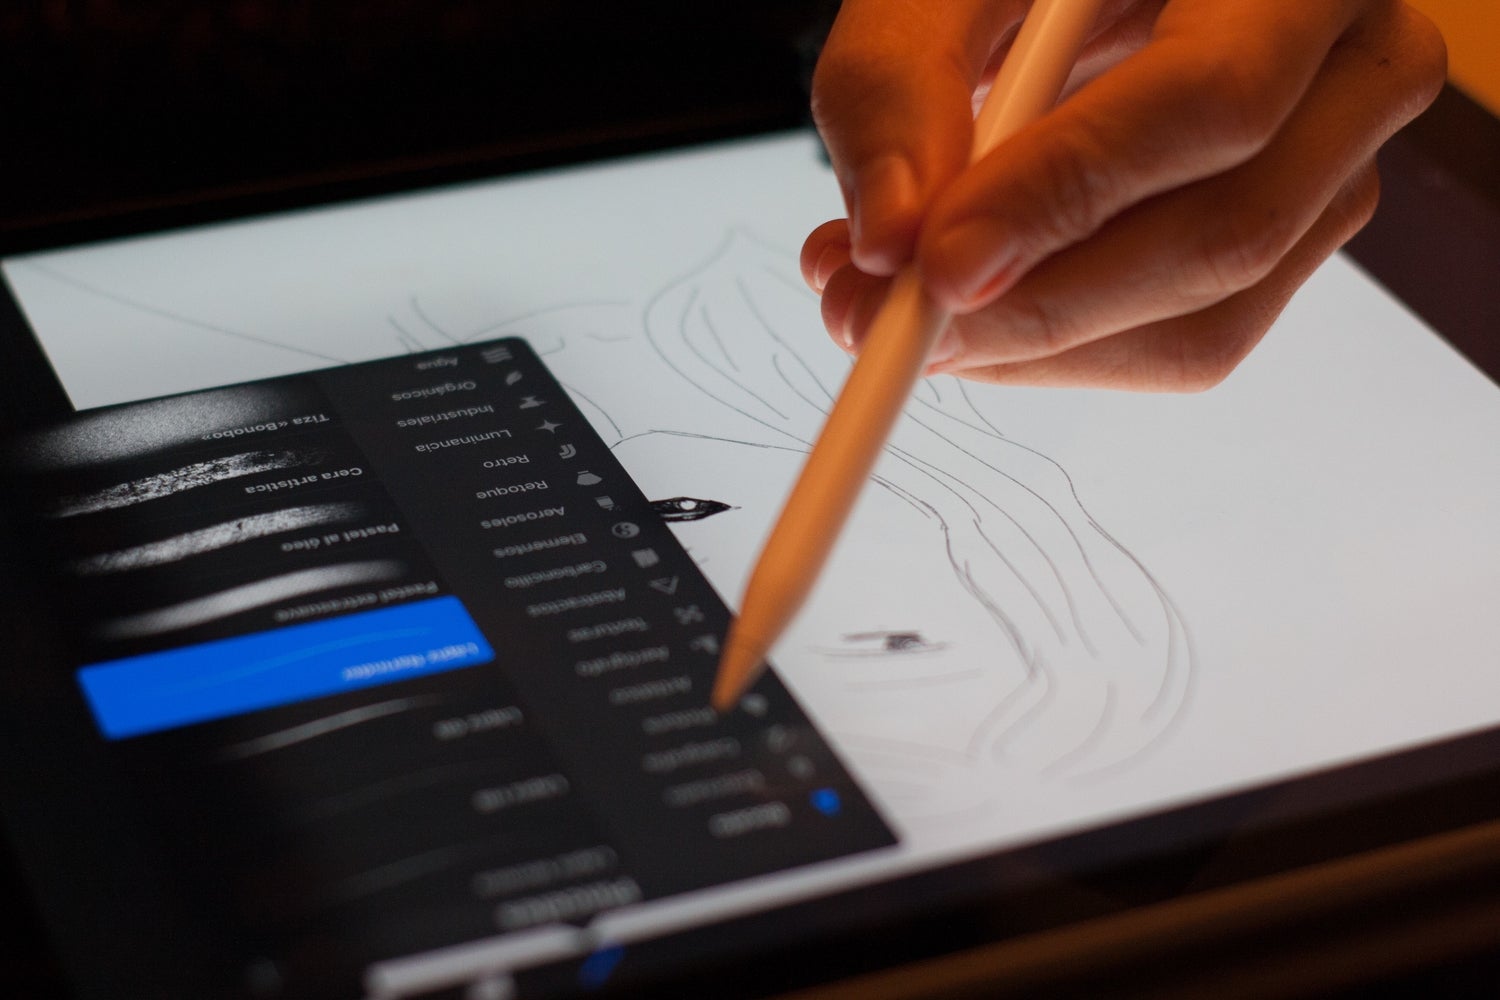 A hand using an iPad with a stylus while drawing and using Adobe Photoshop.